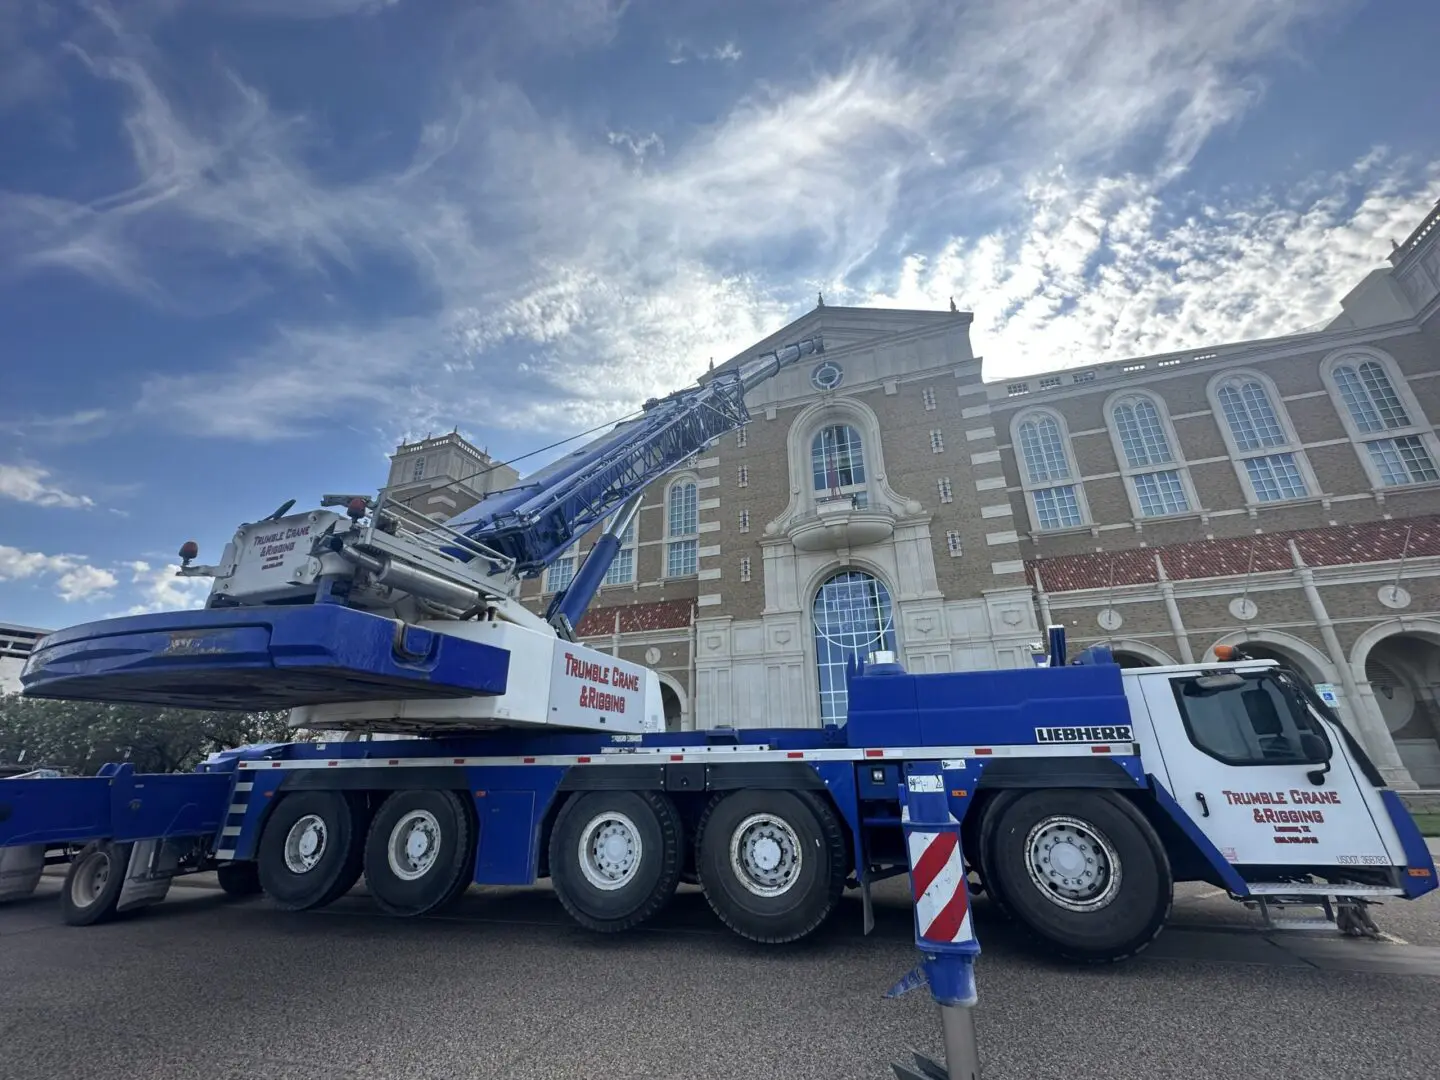 A large crane truck parked in front of a building.